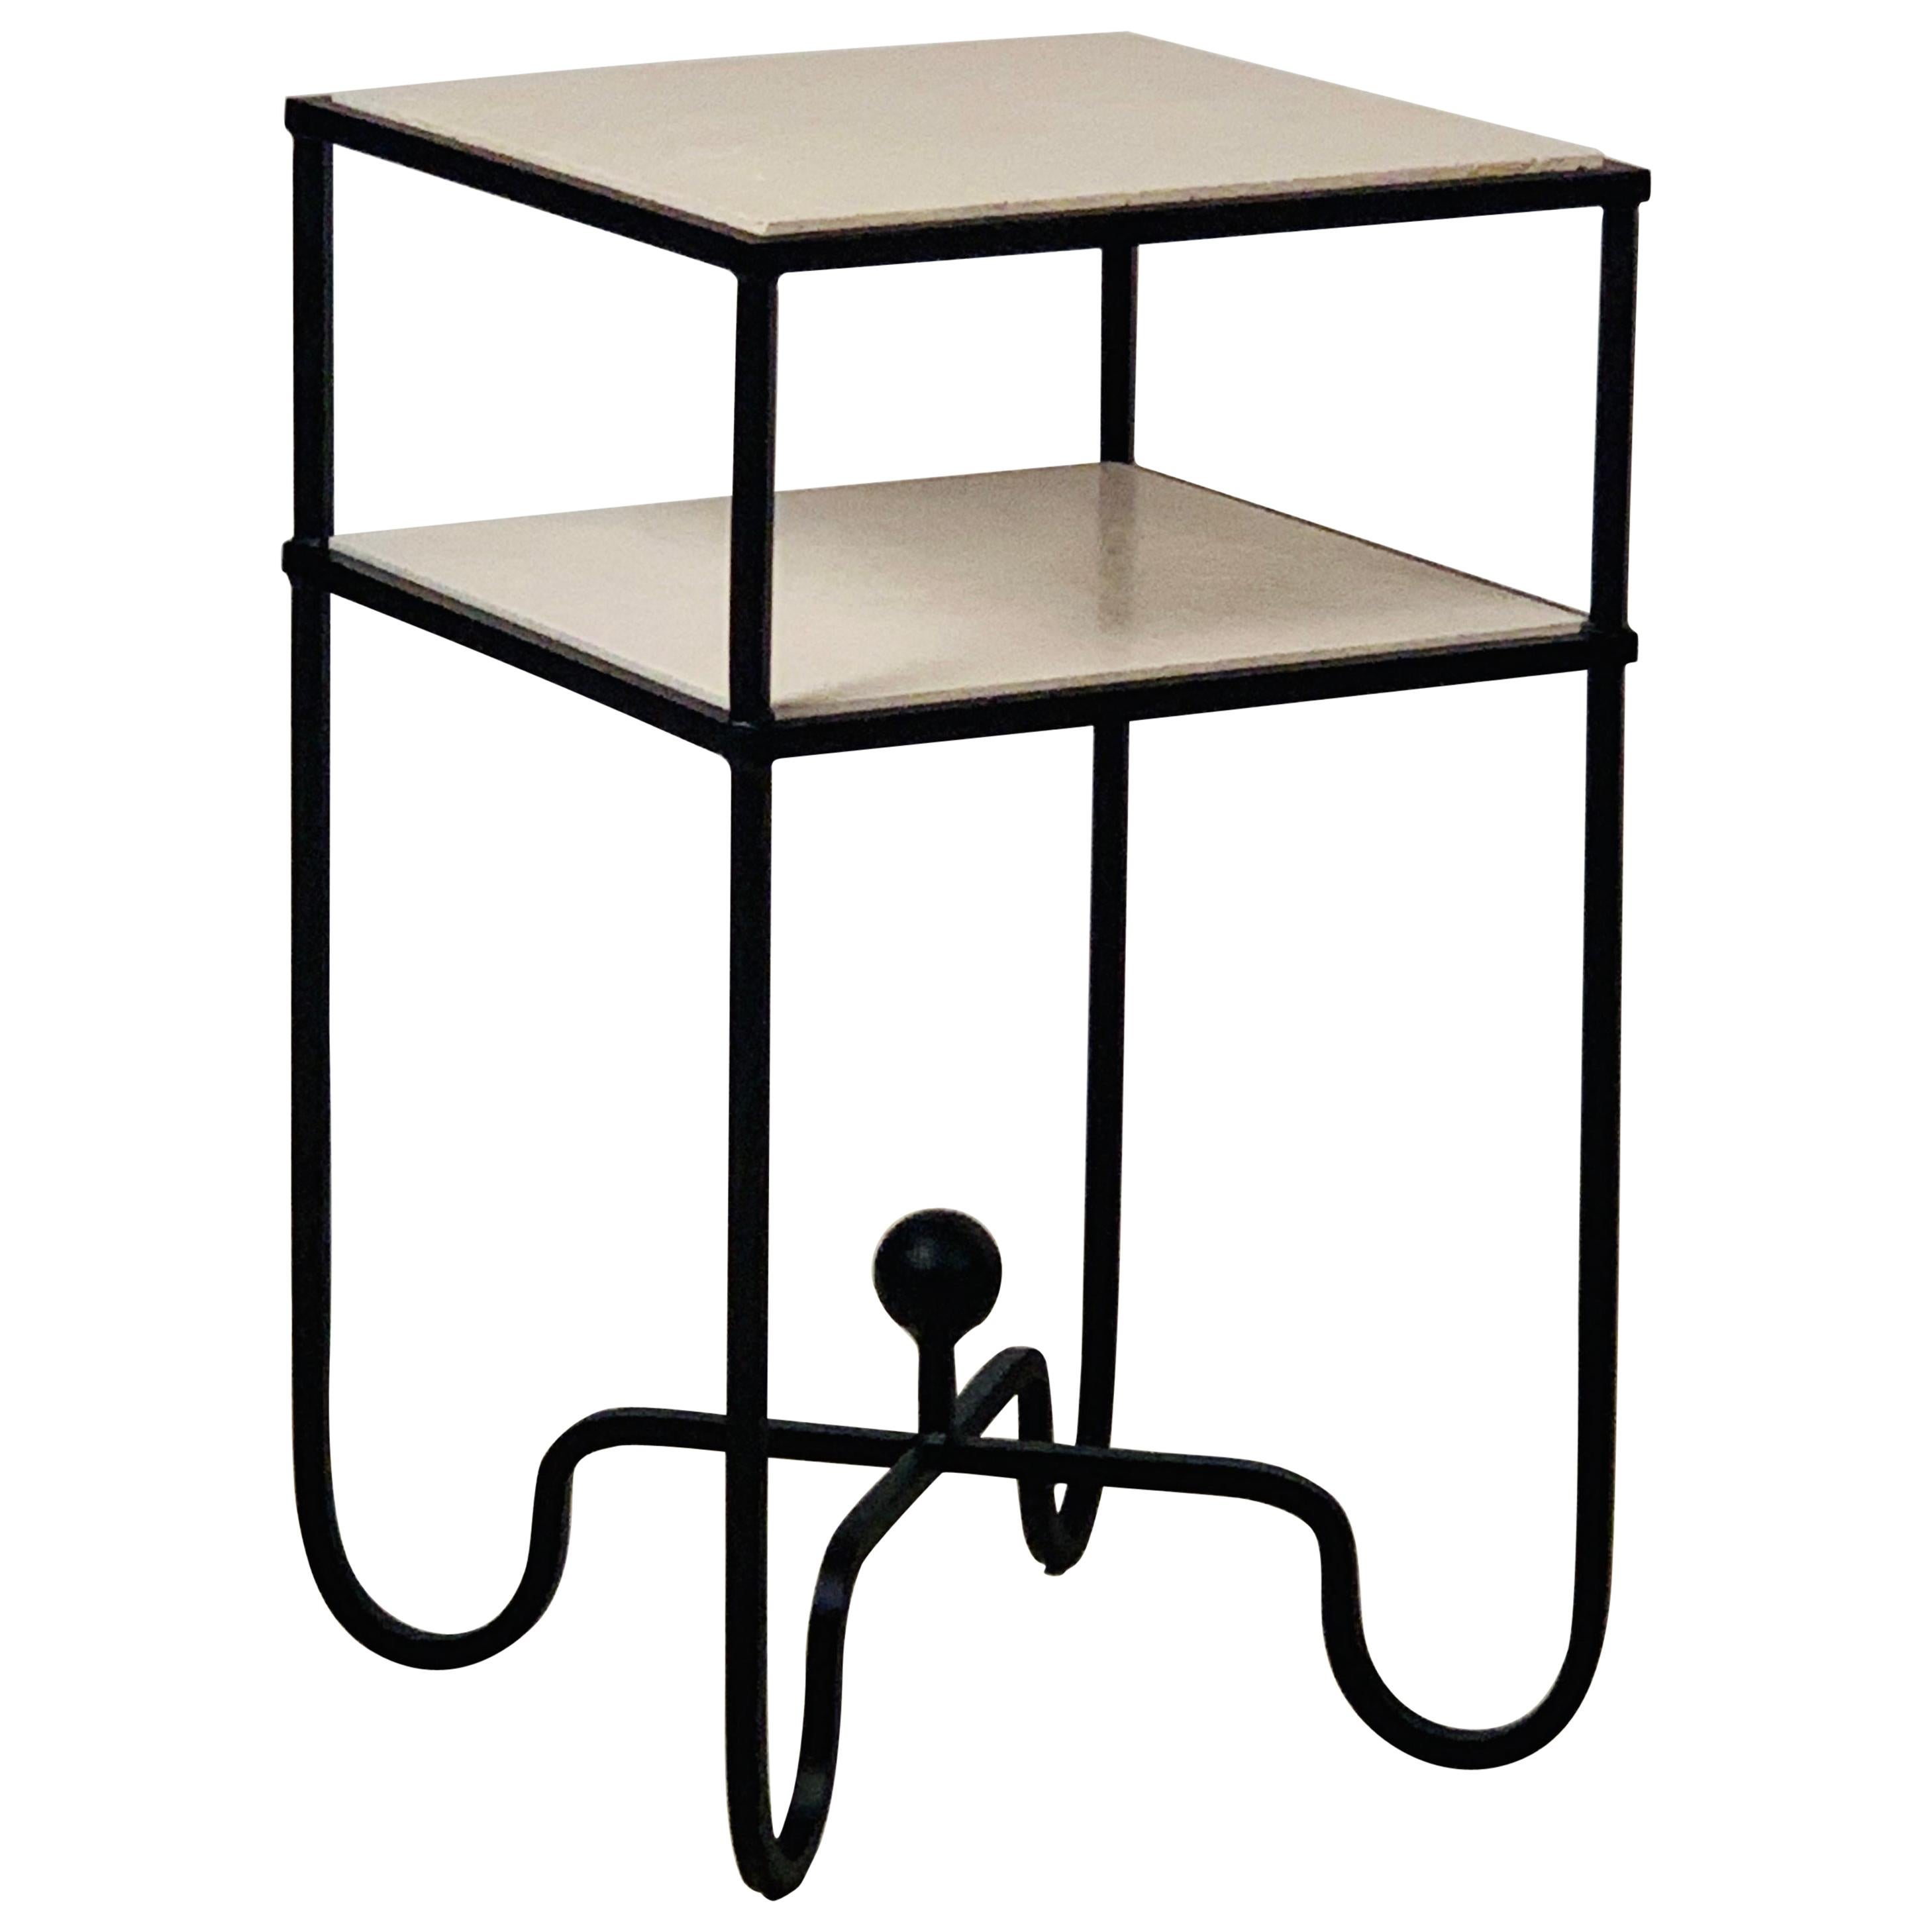 2-Tier Entretoise Side Table by Design Frères For Sale